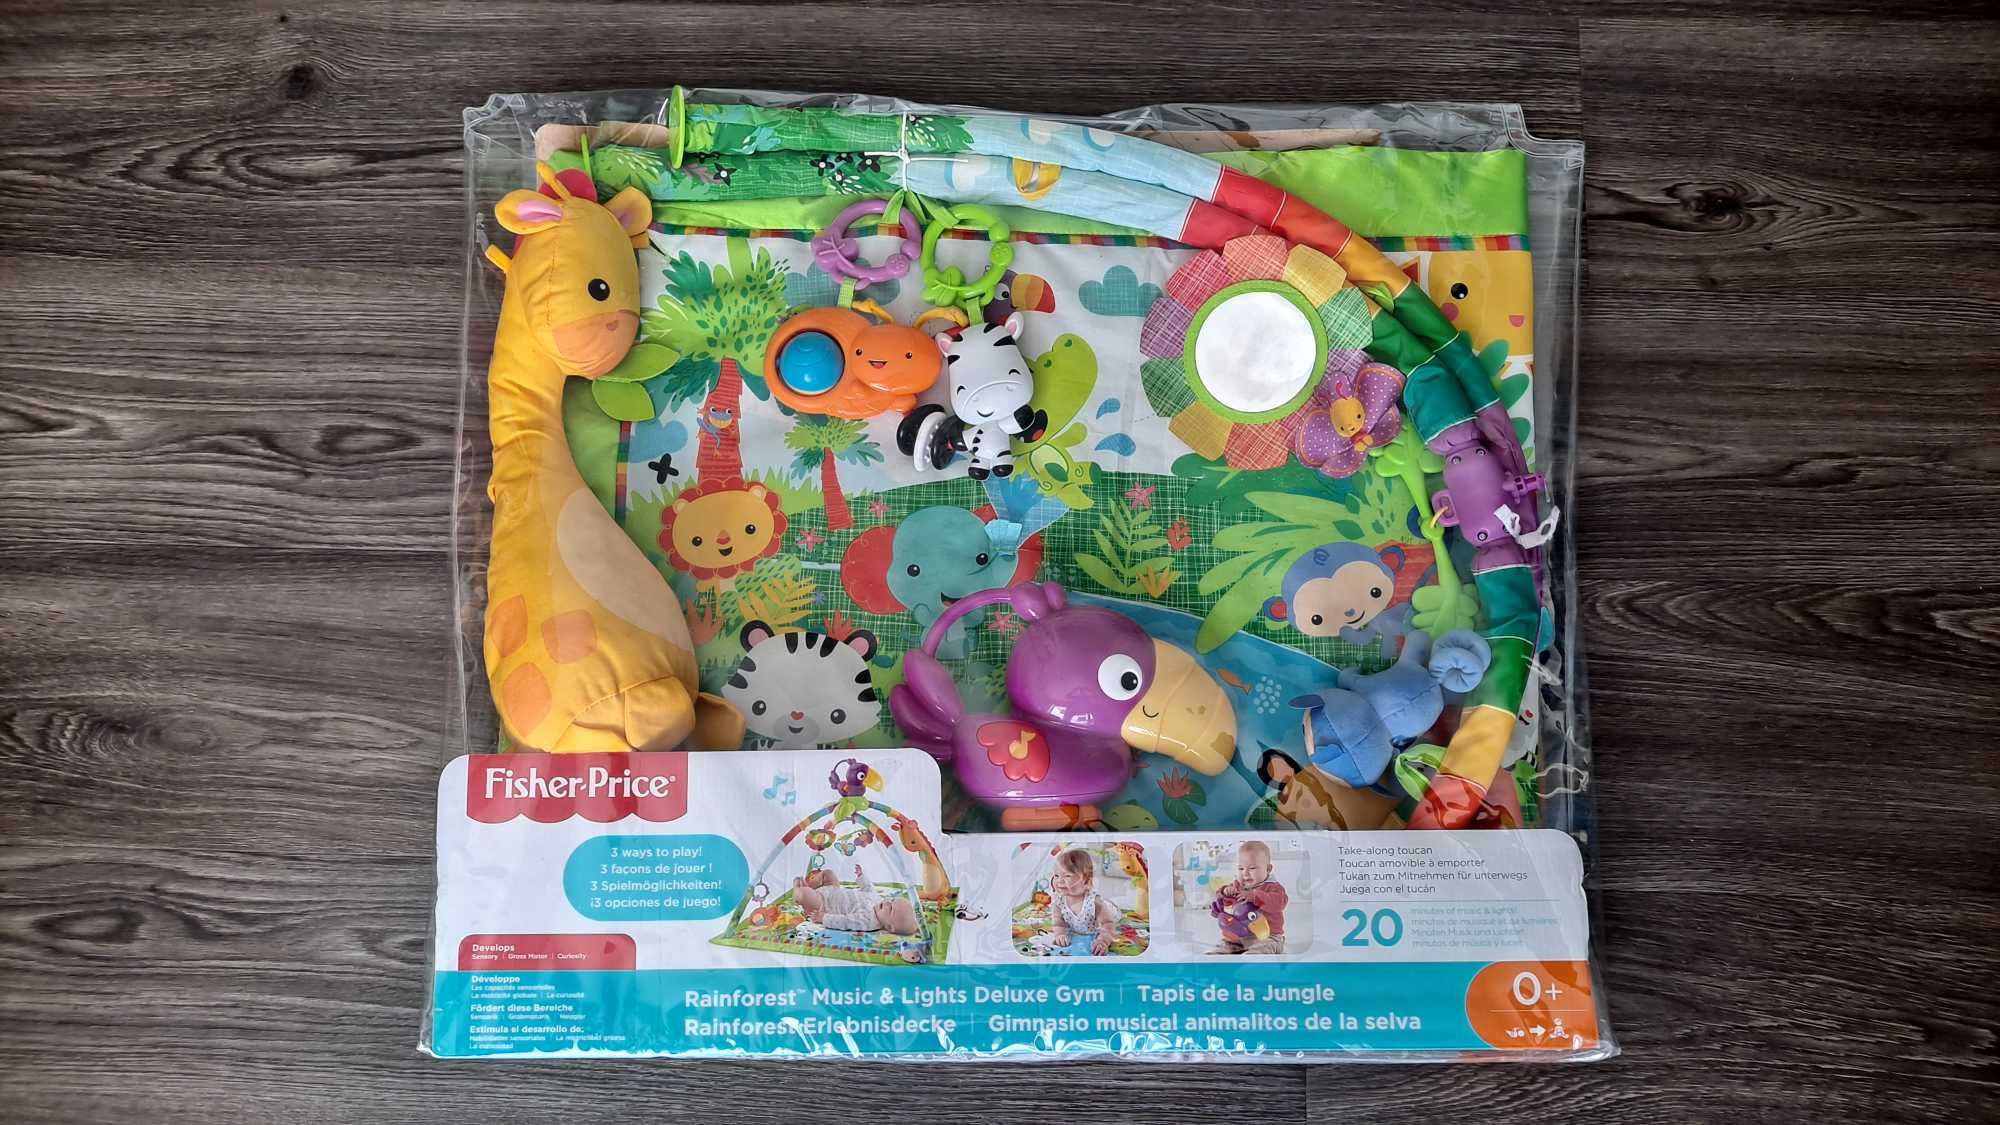 Fisher-Price Rainforest Music & Lights Deluxe Gym DFP08